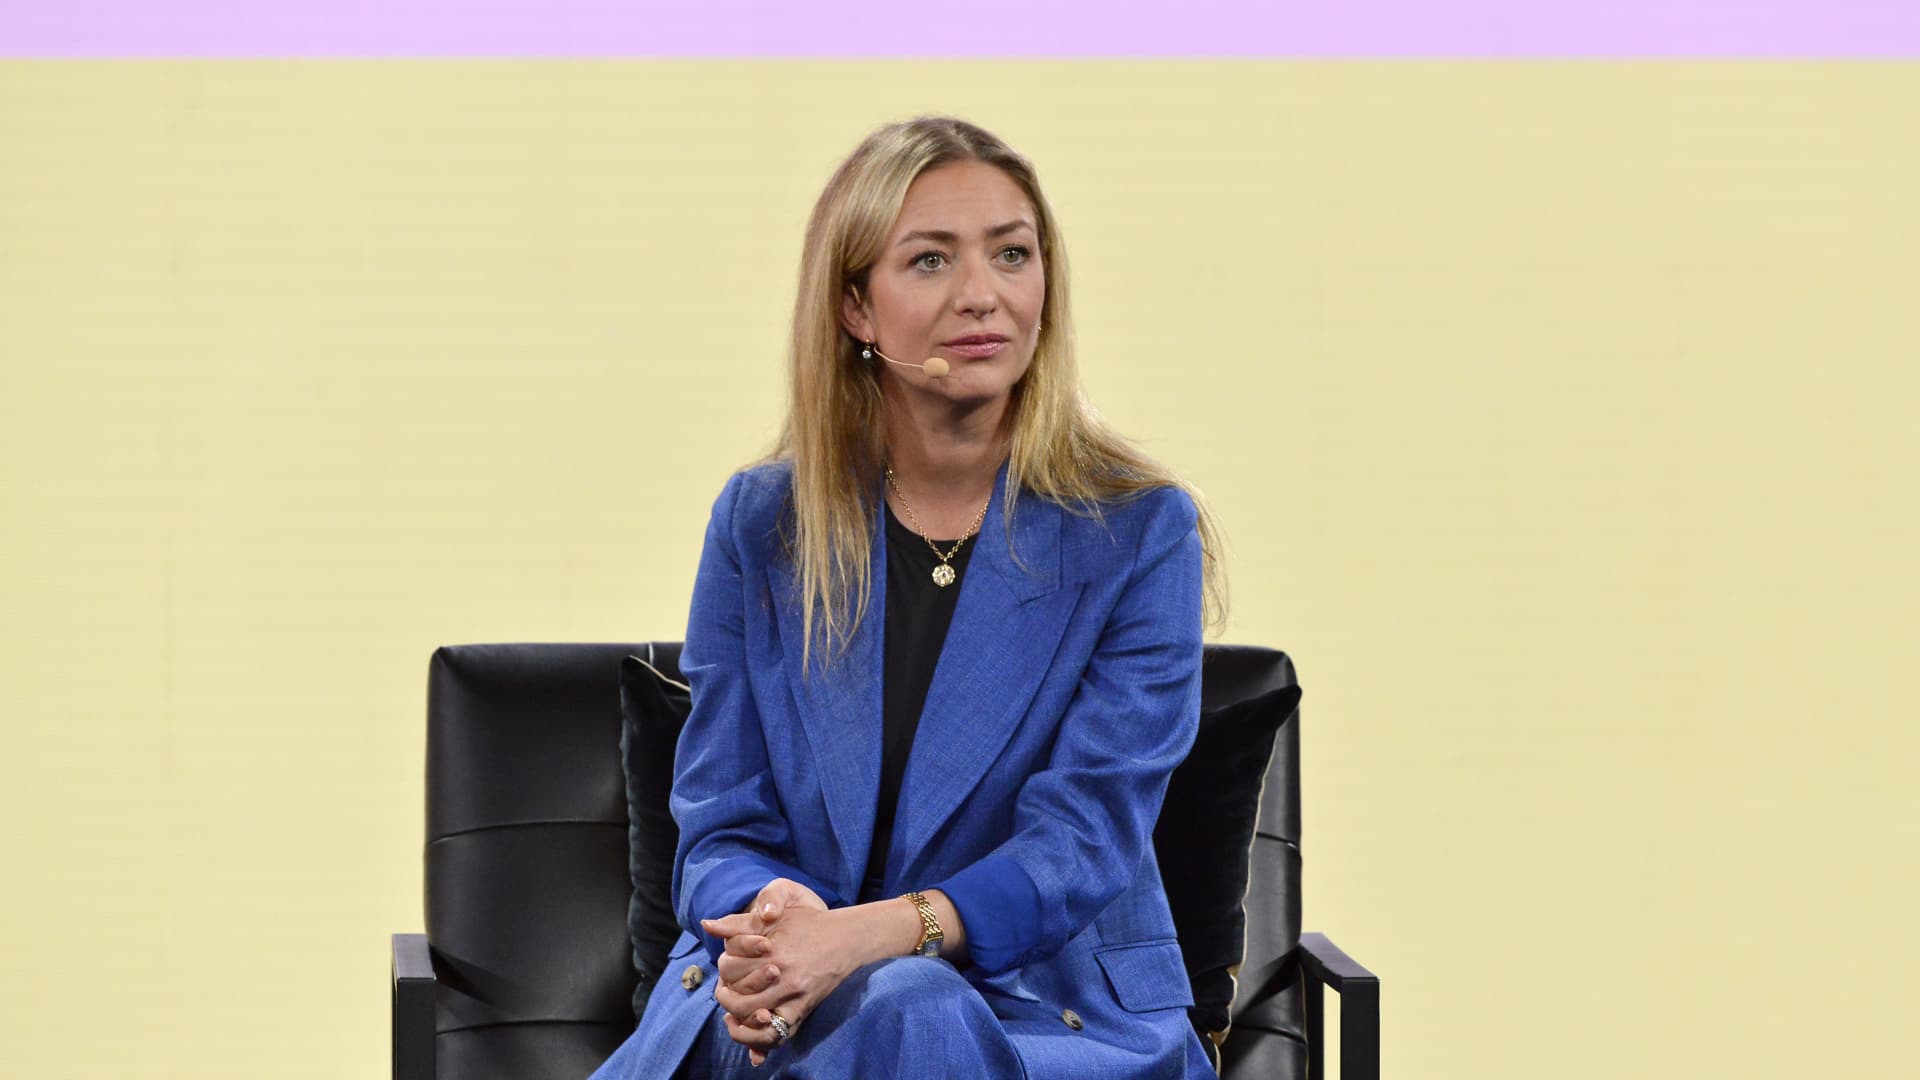 Bumble founder and CEO to step down early next year, Slack CEO to succeed her